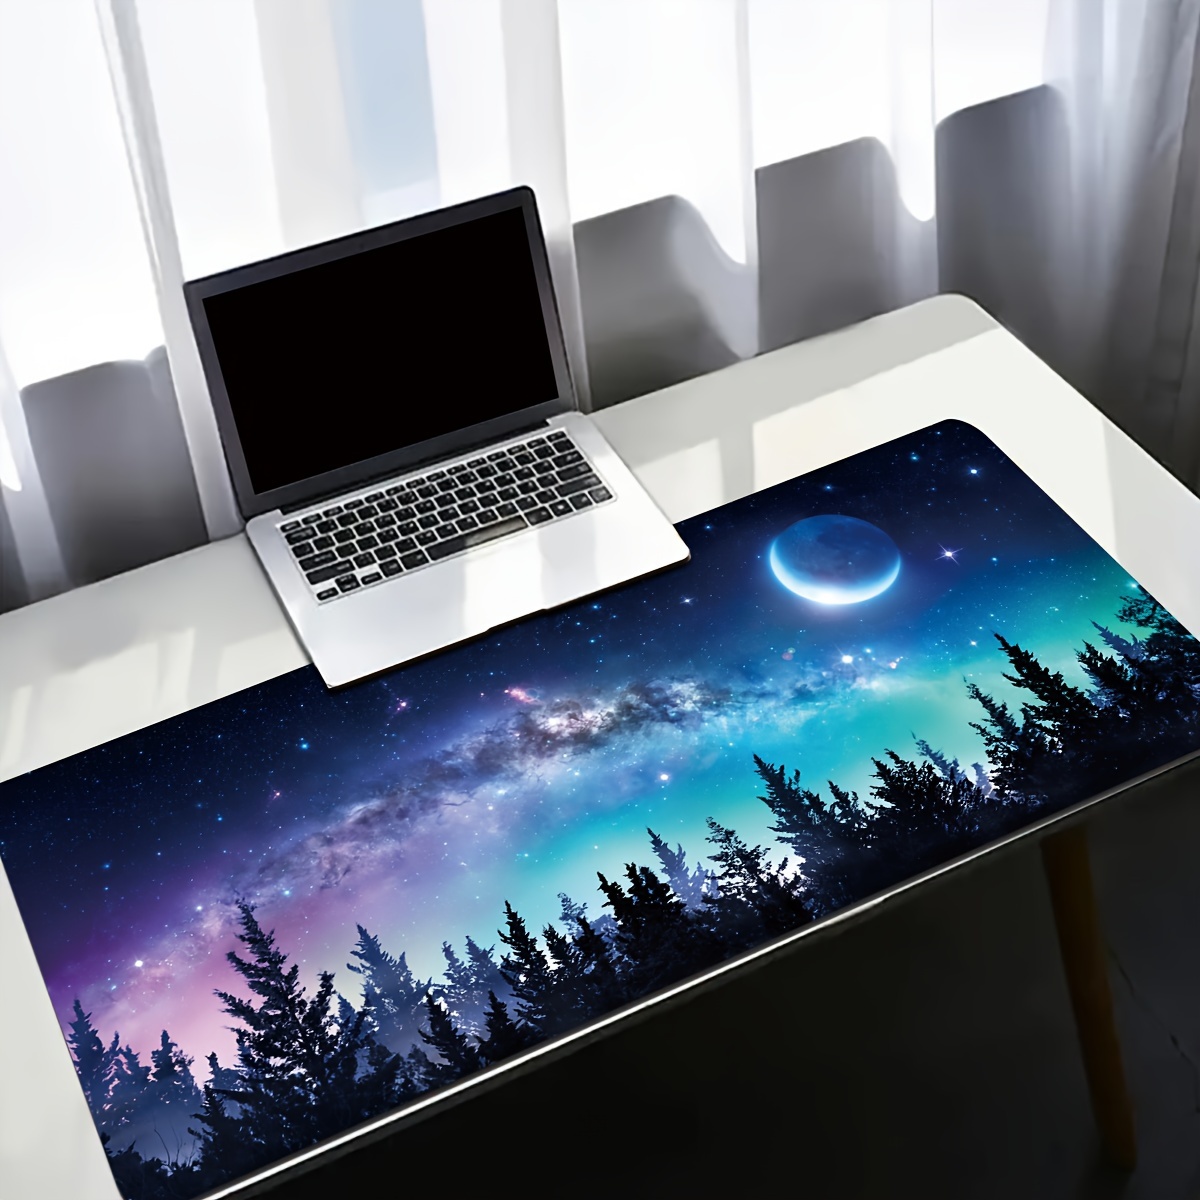 

58 Product Number Forest Tree Starry Sky Moon Game Mouse Pad 31.5x11.8-inch Large Desk Pad Black Expansion Pad Large Mouse Pad Non Slip Rubber Base Keyboard Pad Sewn Edge Game Laptop Pc Desktop